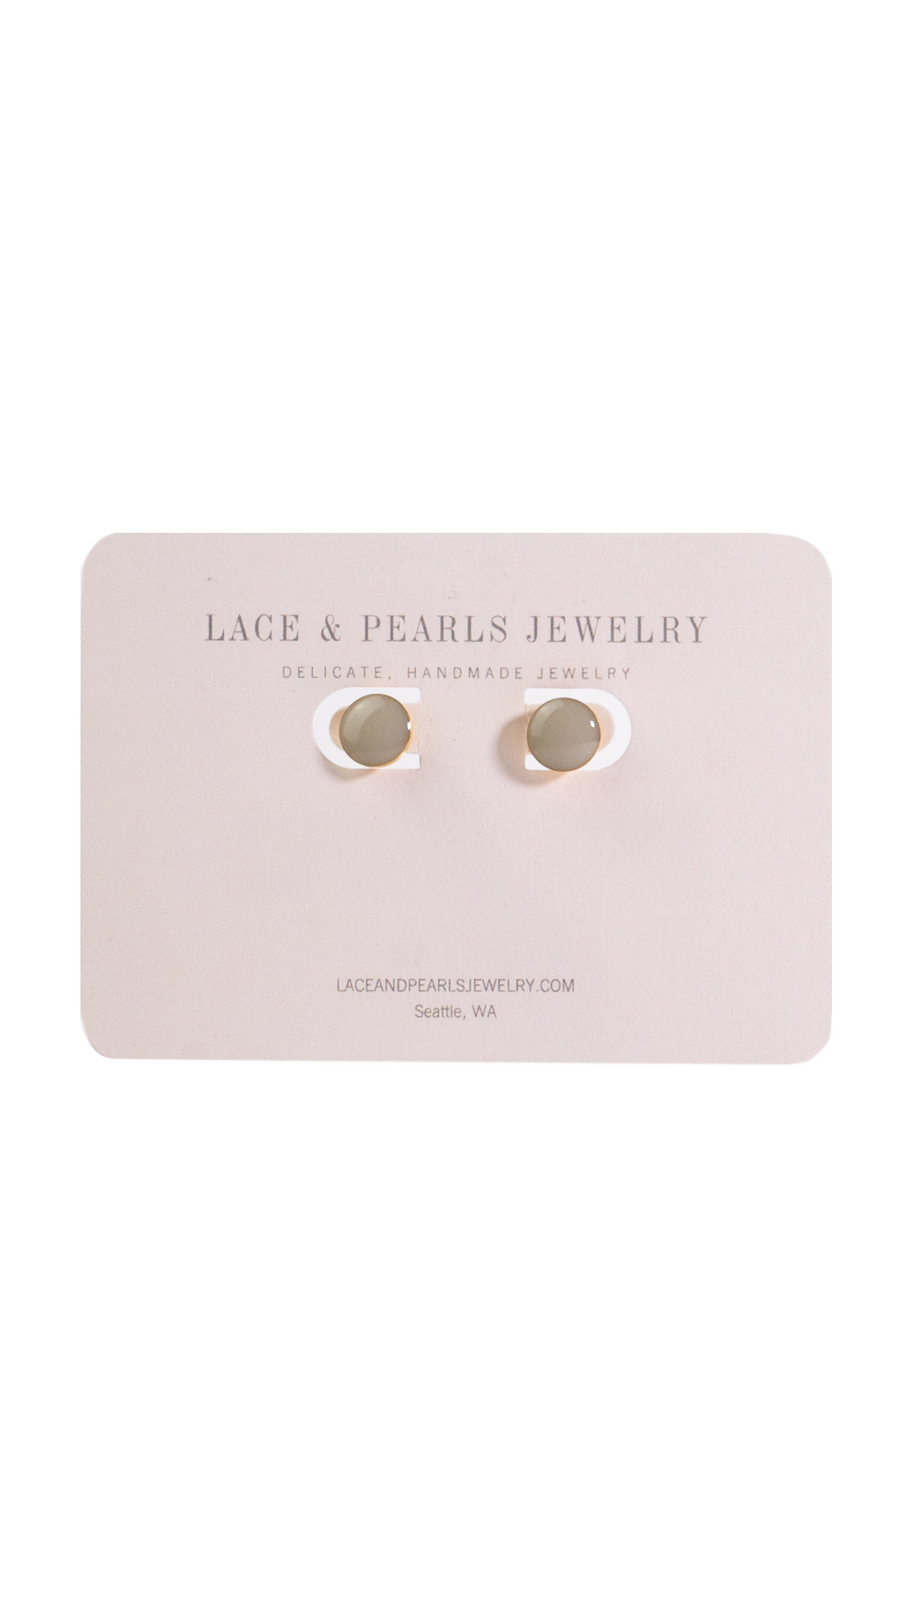 White Resin Circle Stud Earring by Lace & Pearls Jewelry